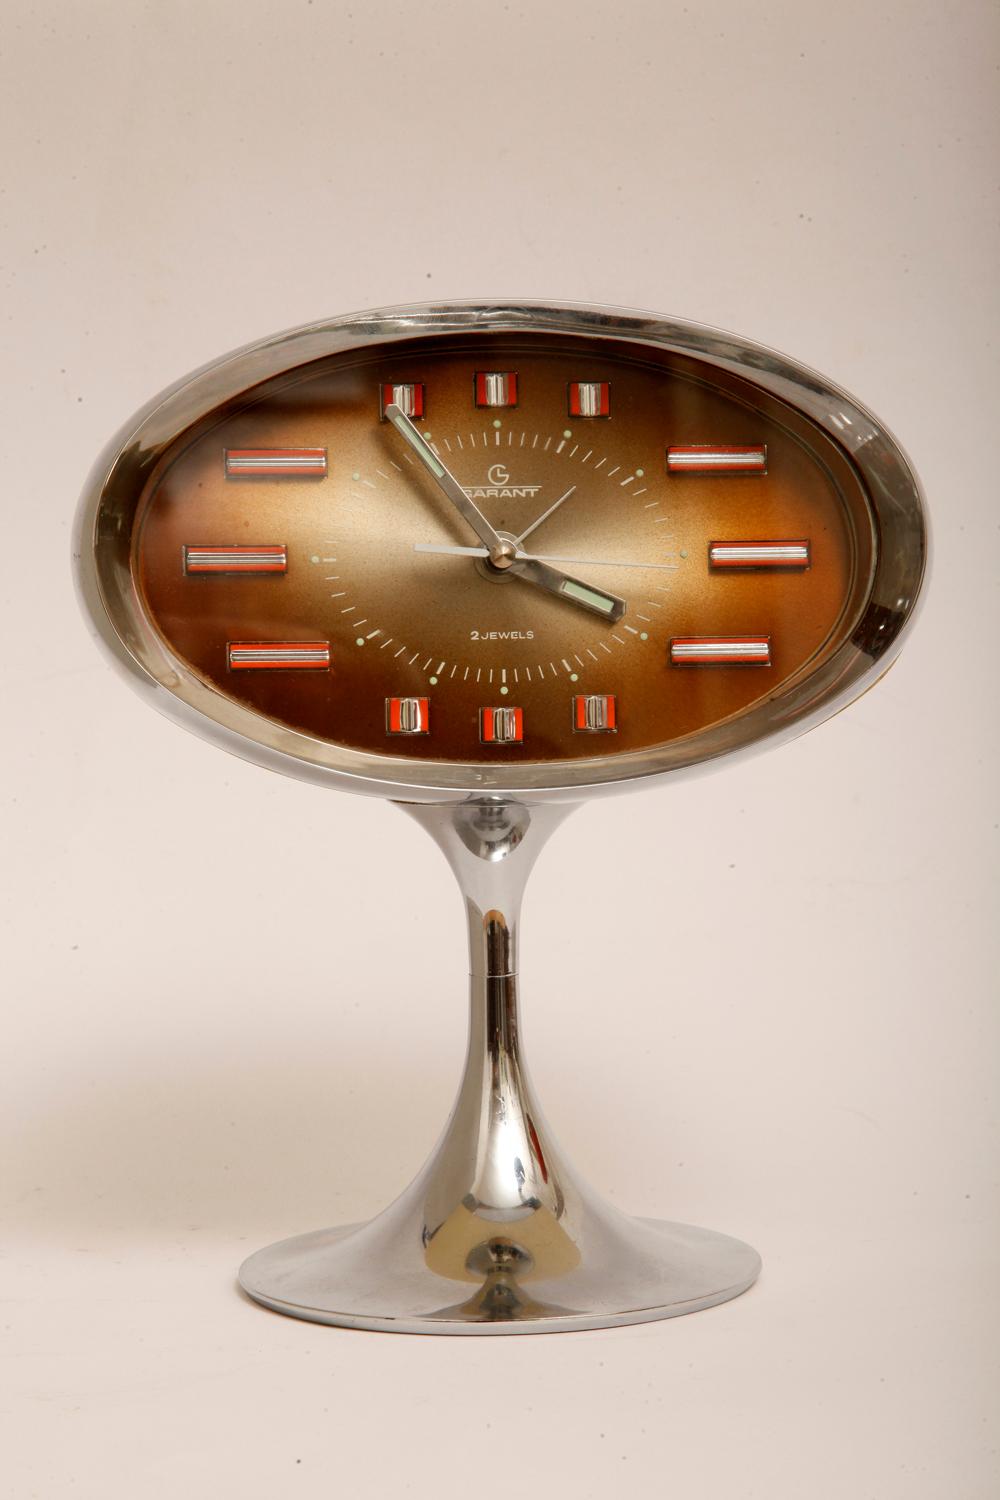 Japanese Space Age Alarm Clock Garant, Plastic and Chromed, 1970s For Sale 8